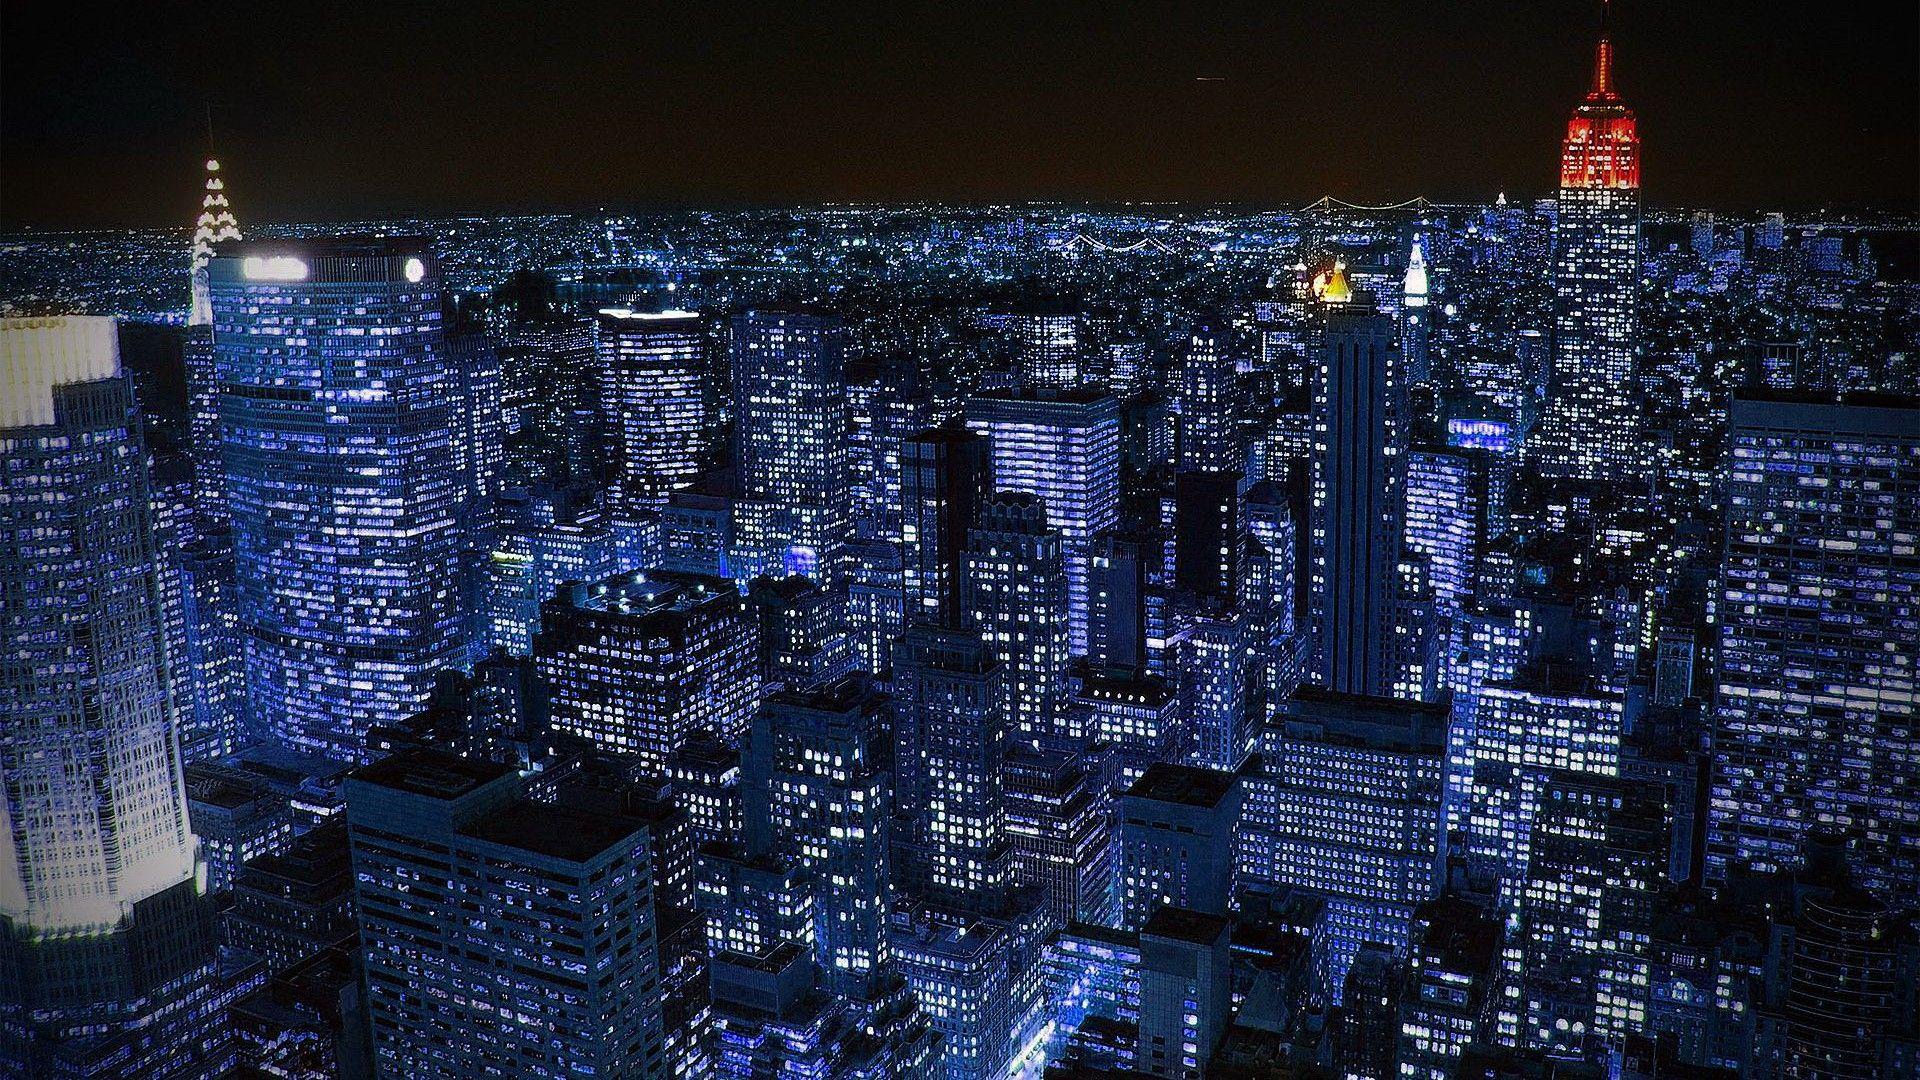 cityscapes, night, lights, New York City, scenic, skyscapes